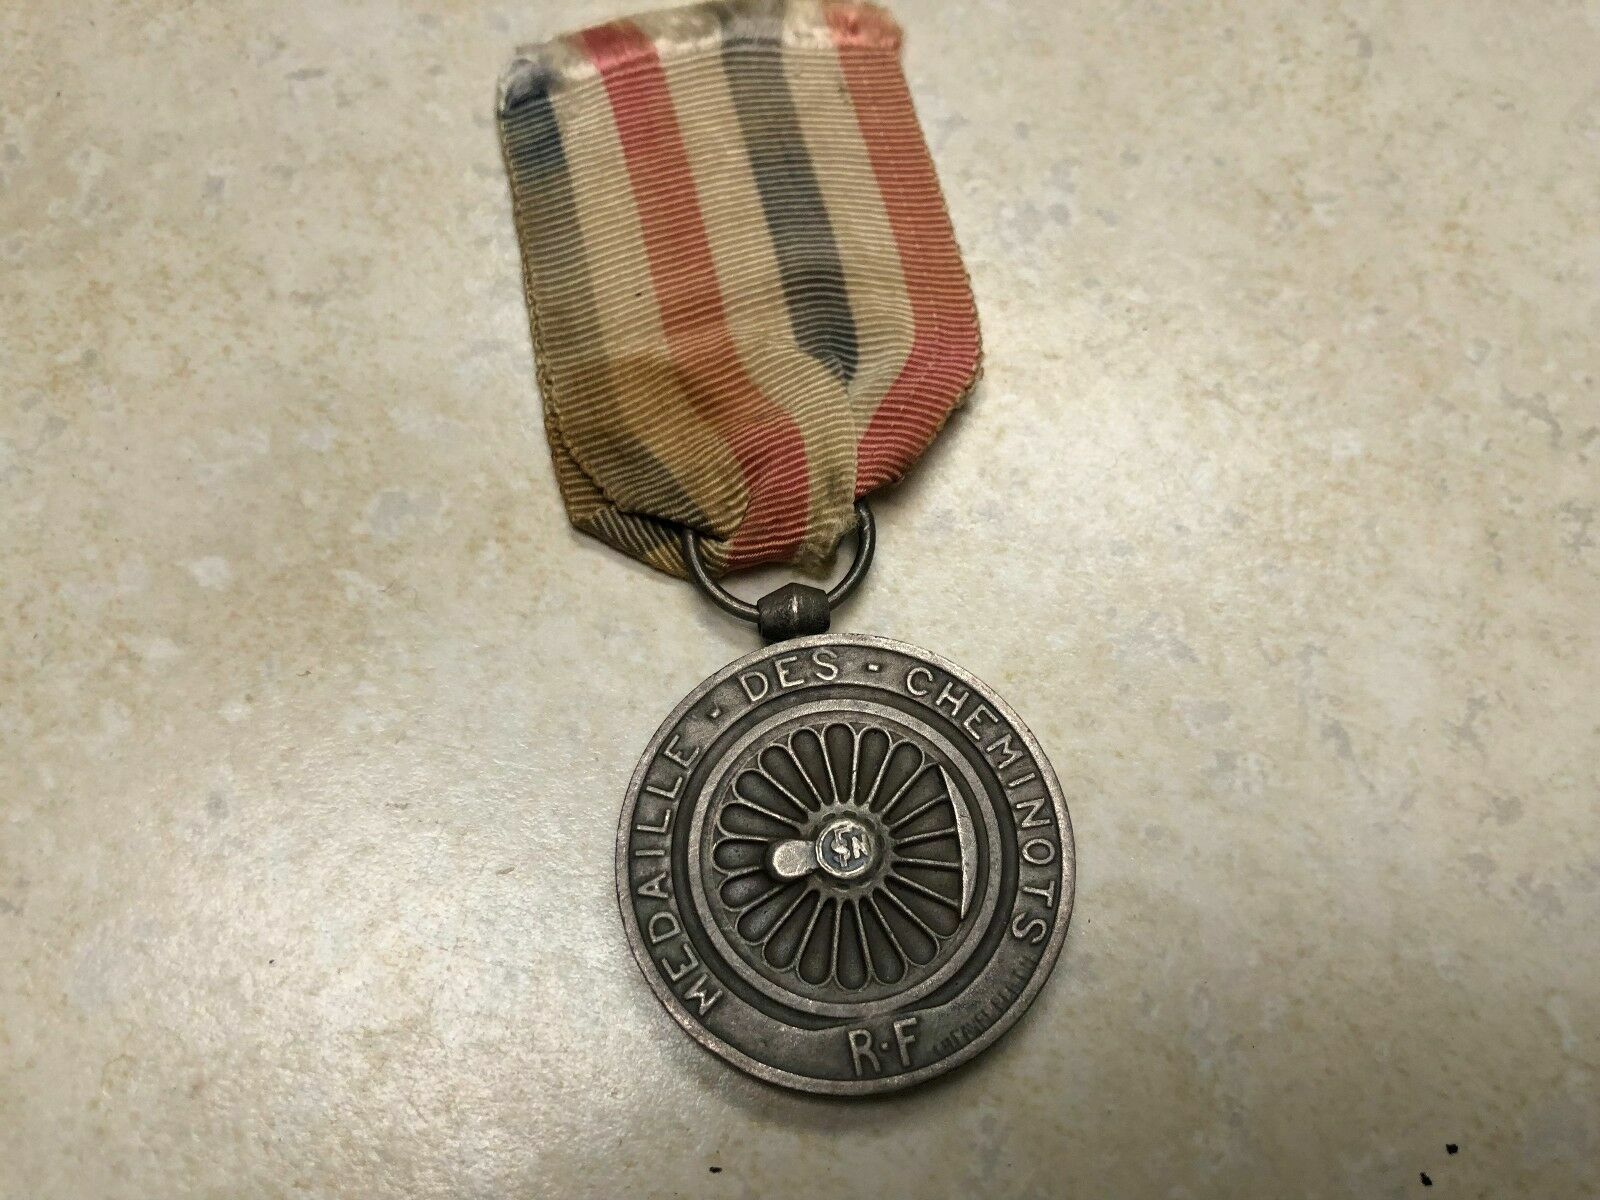 1950 French Railway Medal